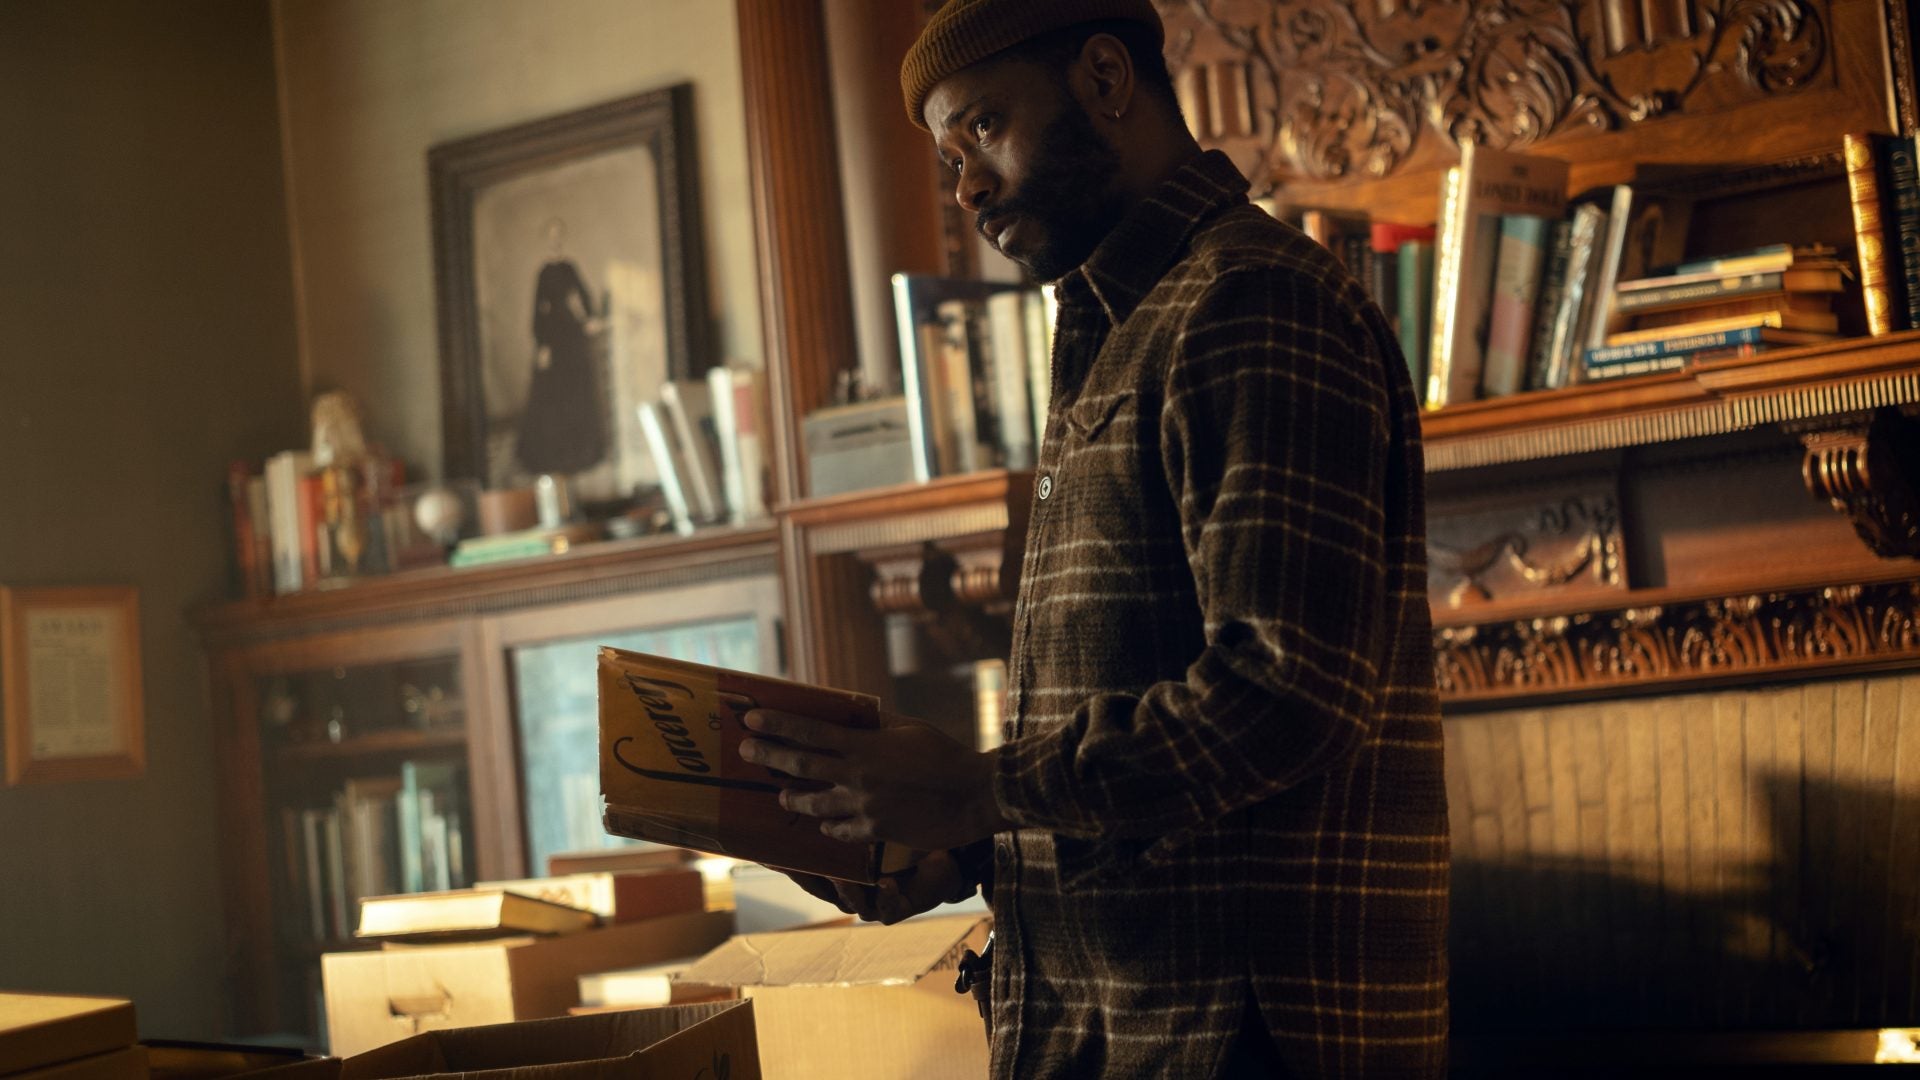 FIRST LOOK: LaKeith Stanfield’s Apple TV+ Horror Series ‘The Changeling’ Sets Premiere Date